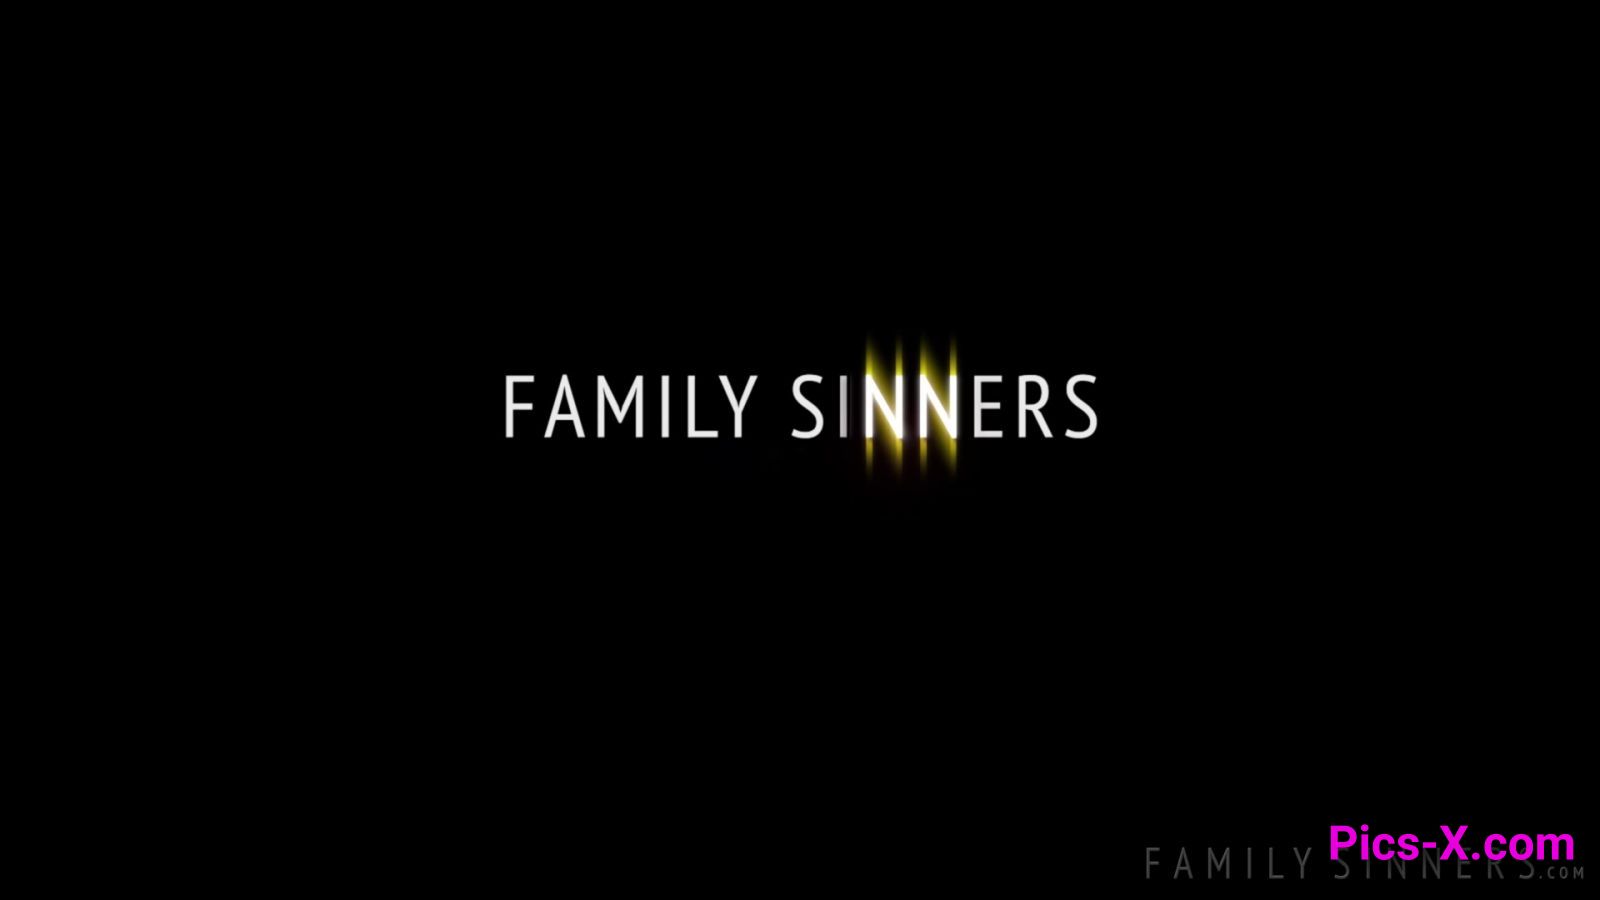 Mothers & Stepsons 6 Scene 4 - Family Sinners - Image 1